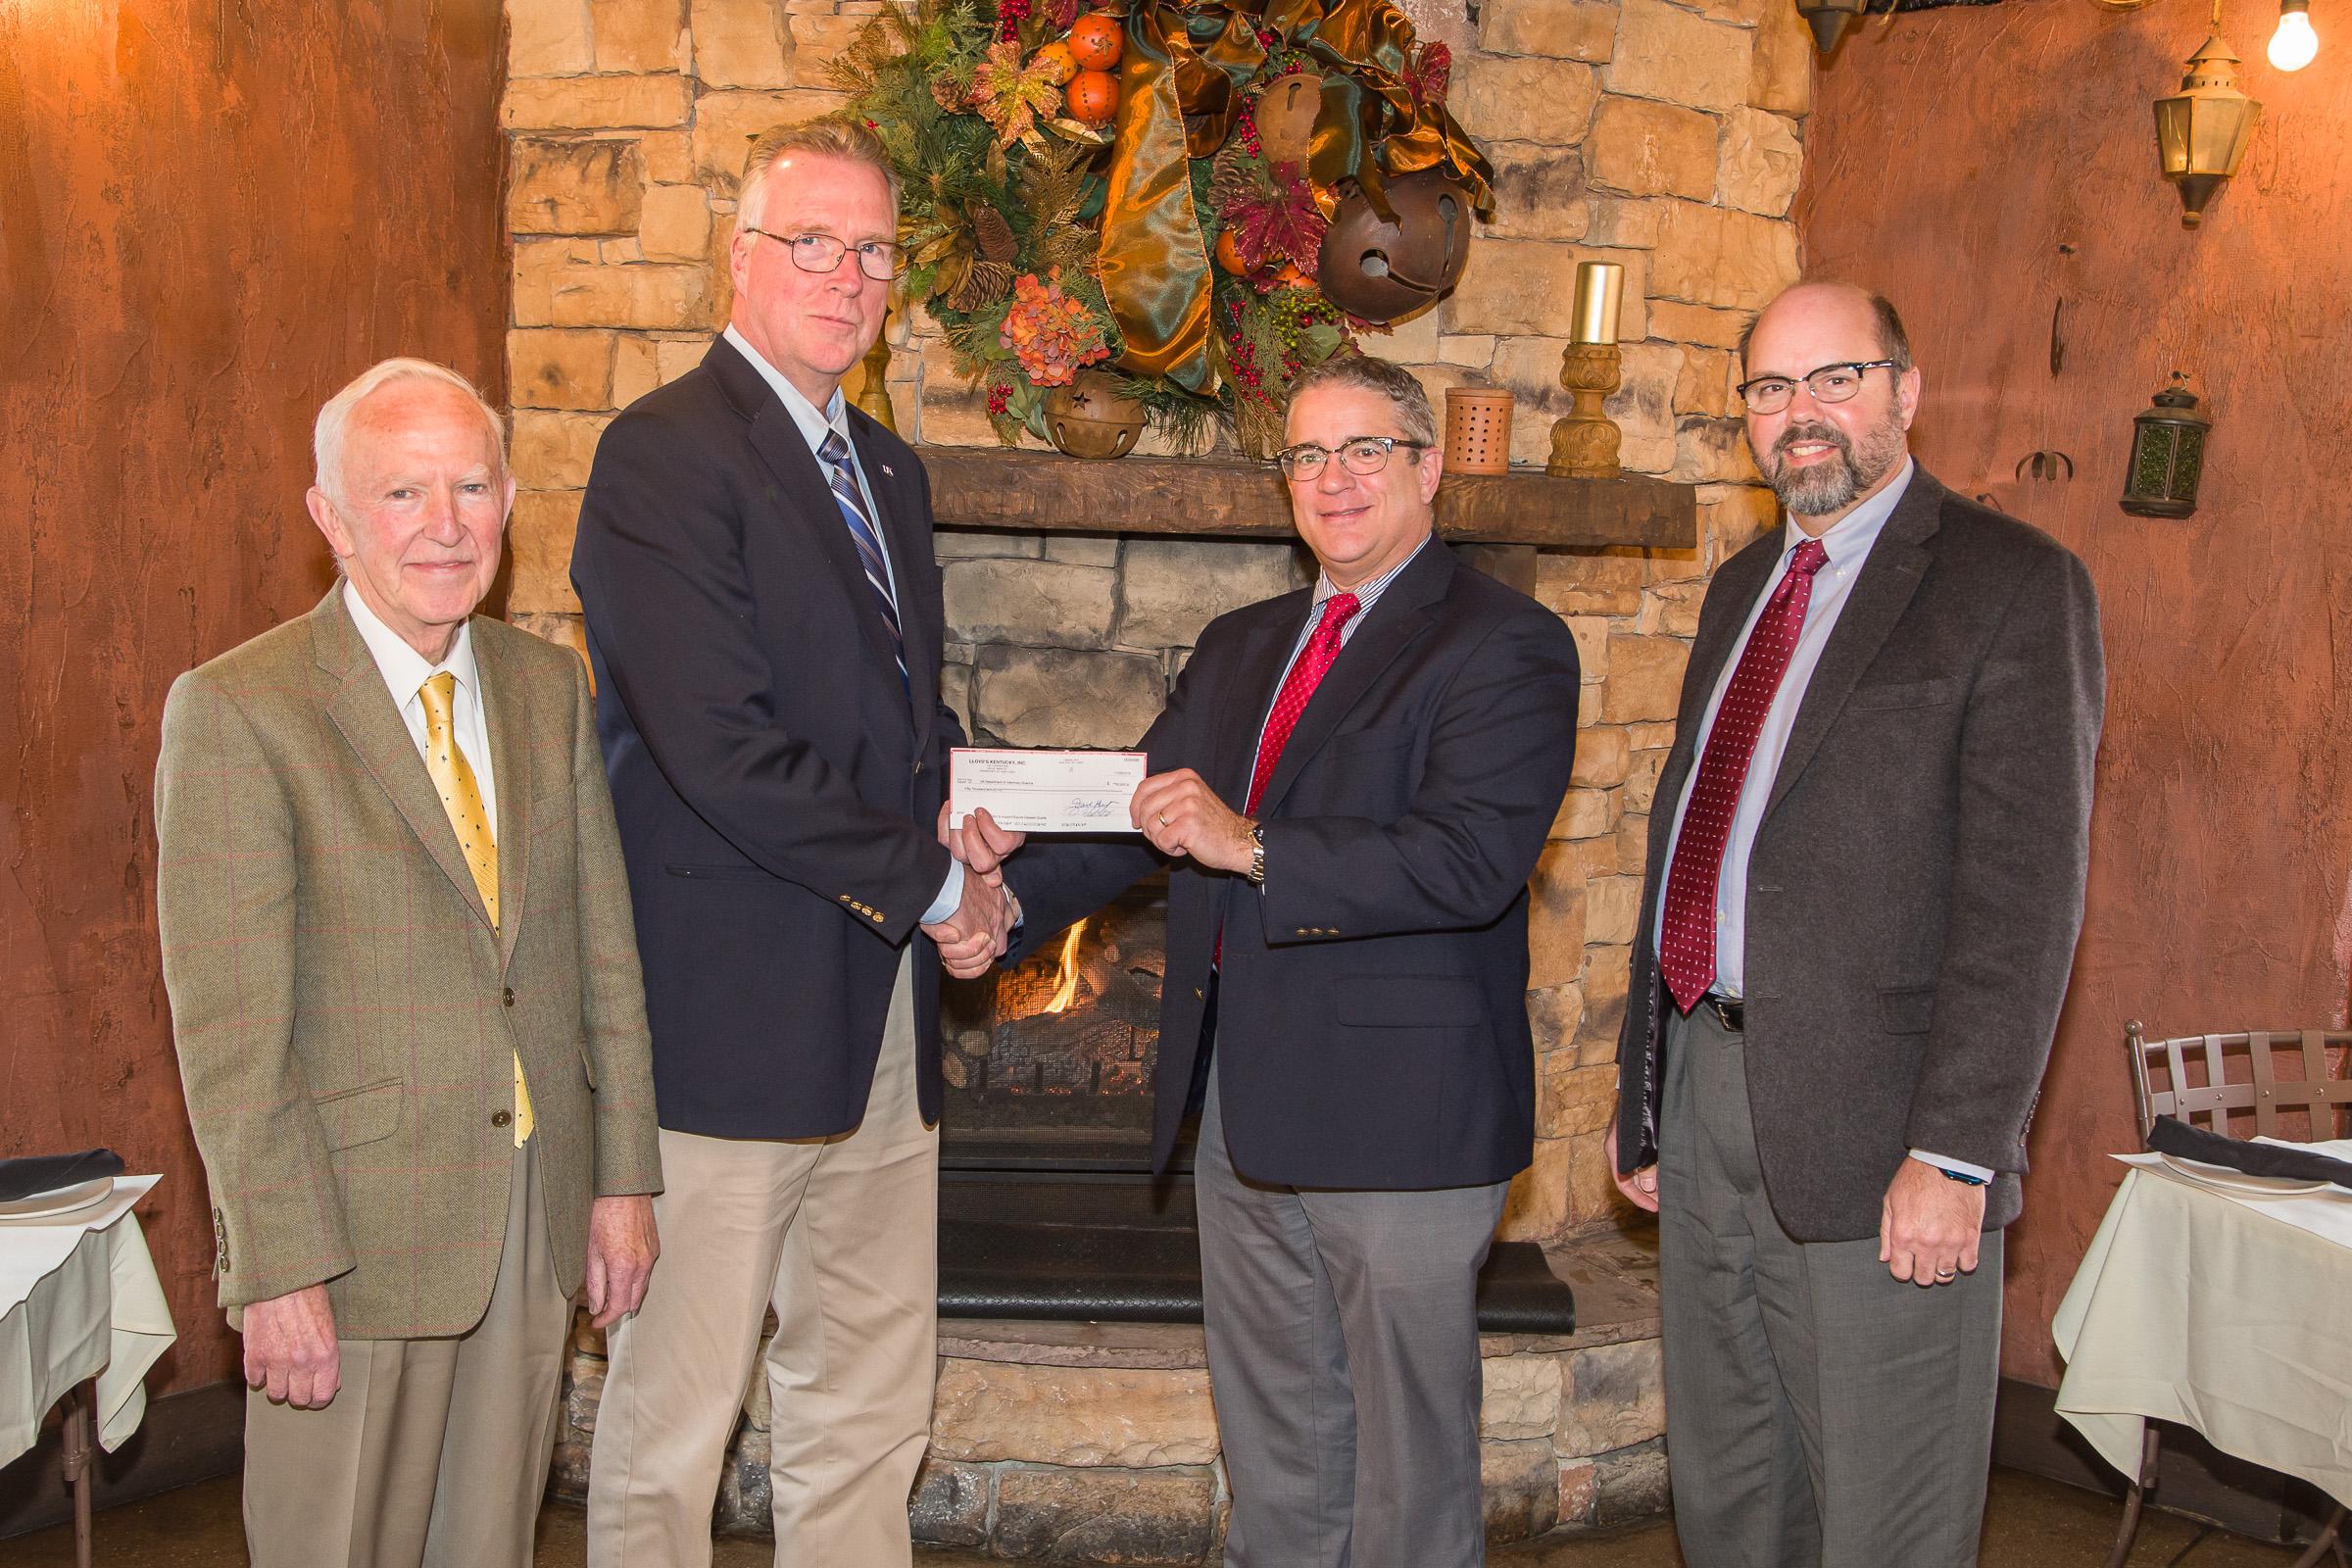 Pat Talley (Center Right), Regional Director, U.S. Central Lloyd's America,  gives Dr. David Horohov (Center Left), Chair, Department of Veterinary Science,  a check on behalf of Underwriters at Lloyd's, London to support publication of the Equine Disease